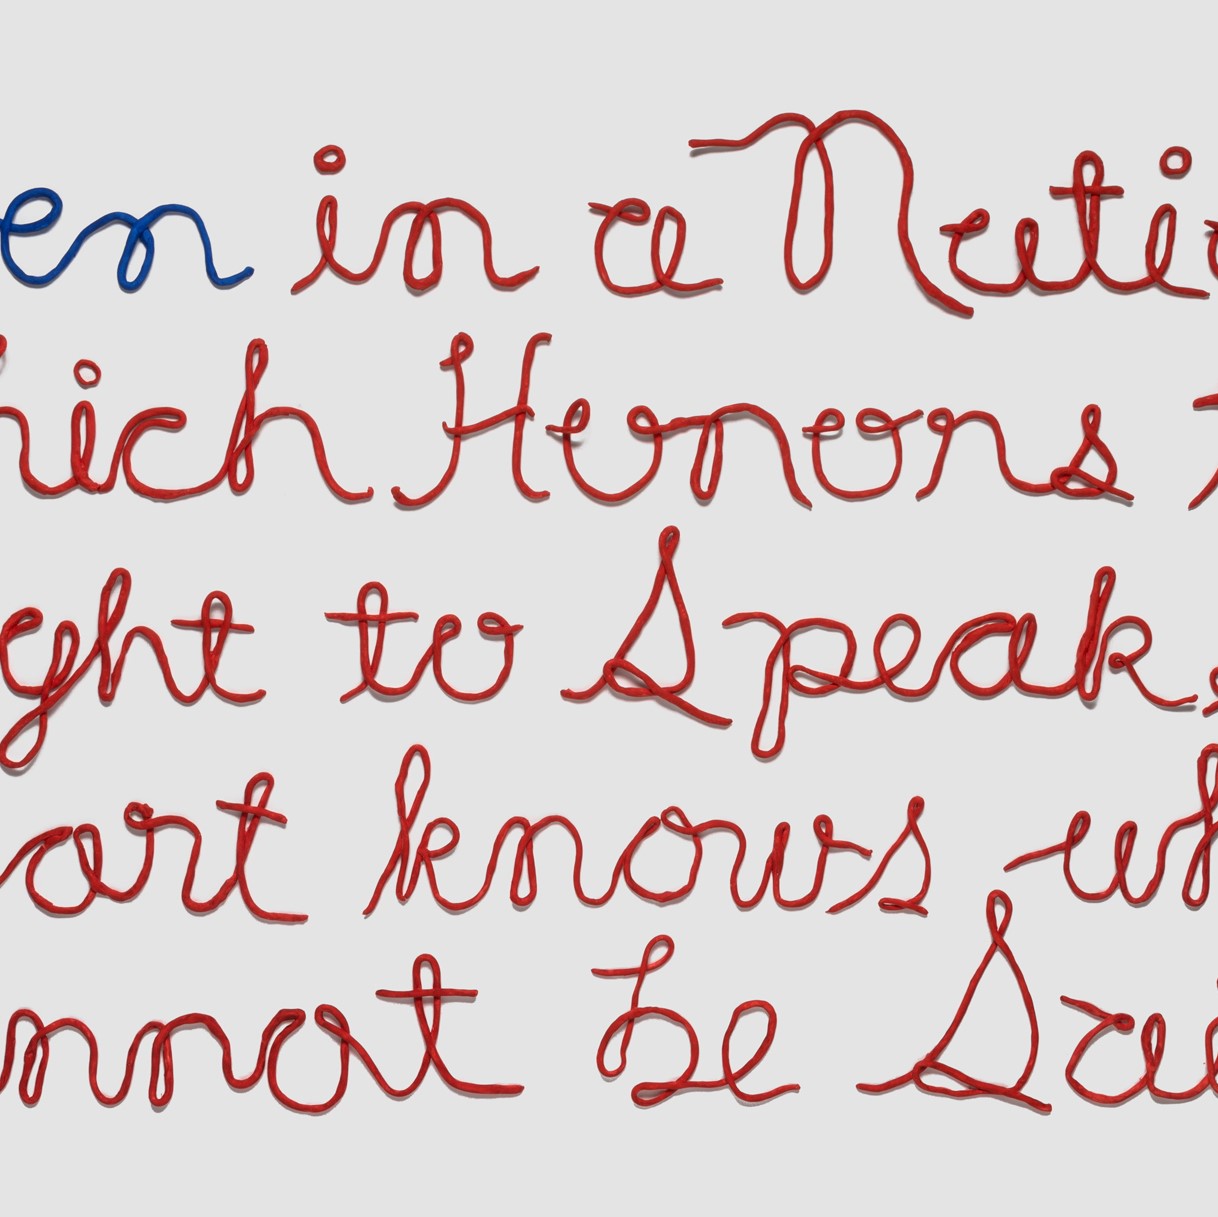  red and blue cursive lettering for a poem: Even in a Nation which Honors the Right to Speak, a Heart knows what Cannot be Said.